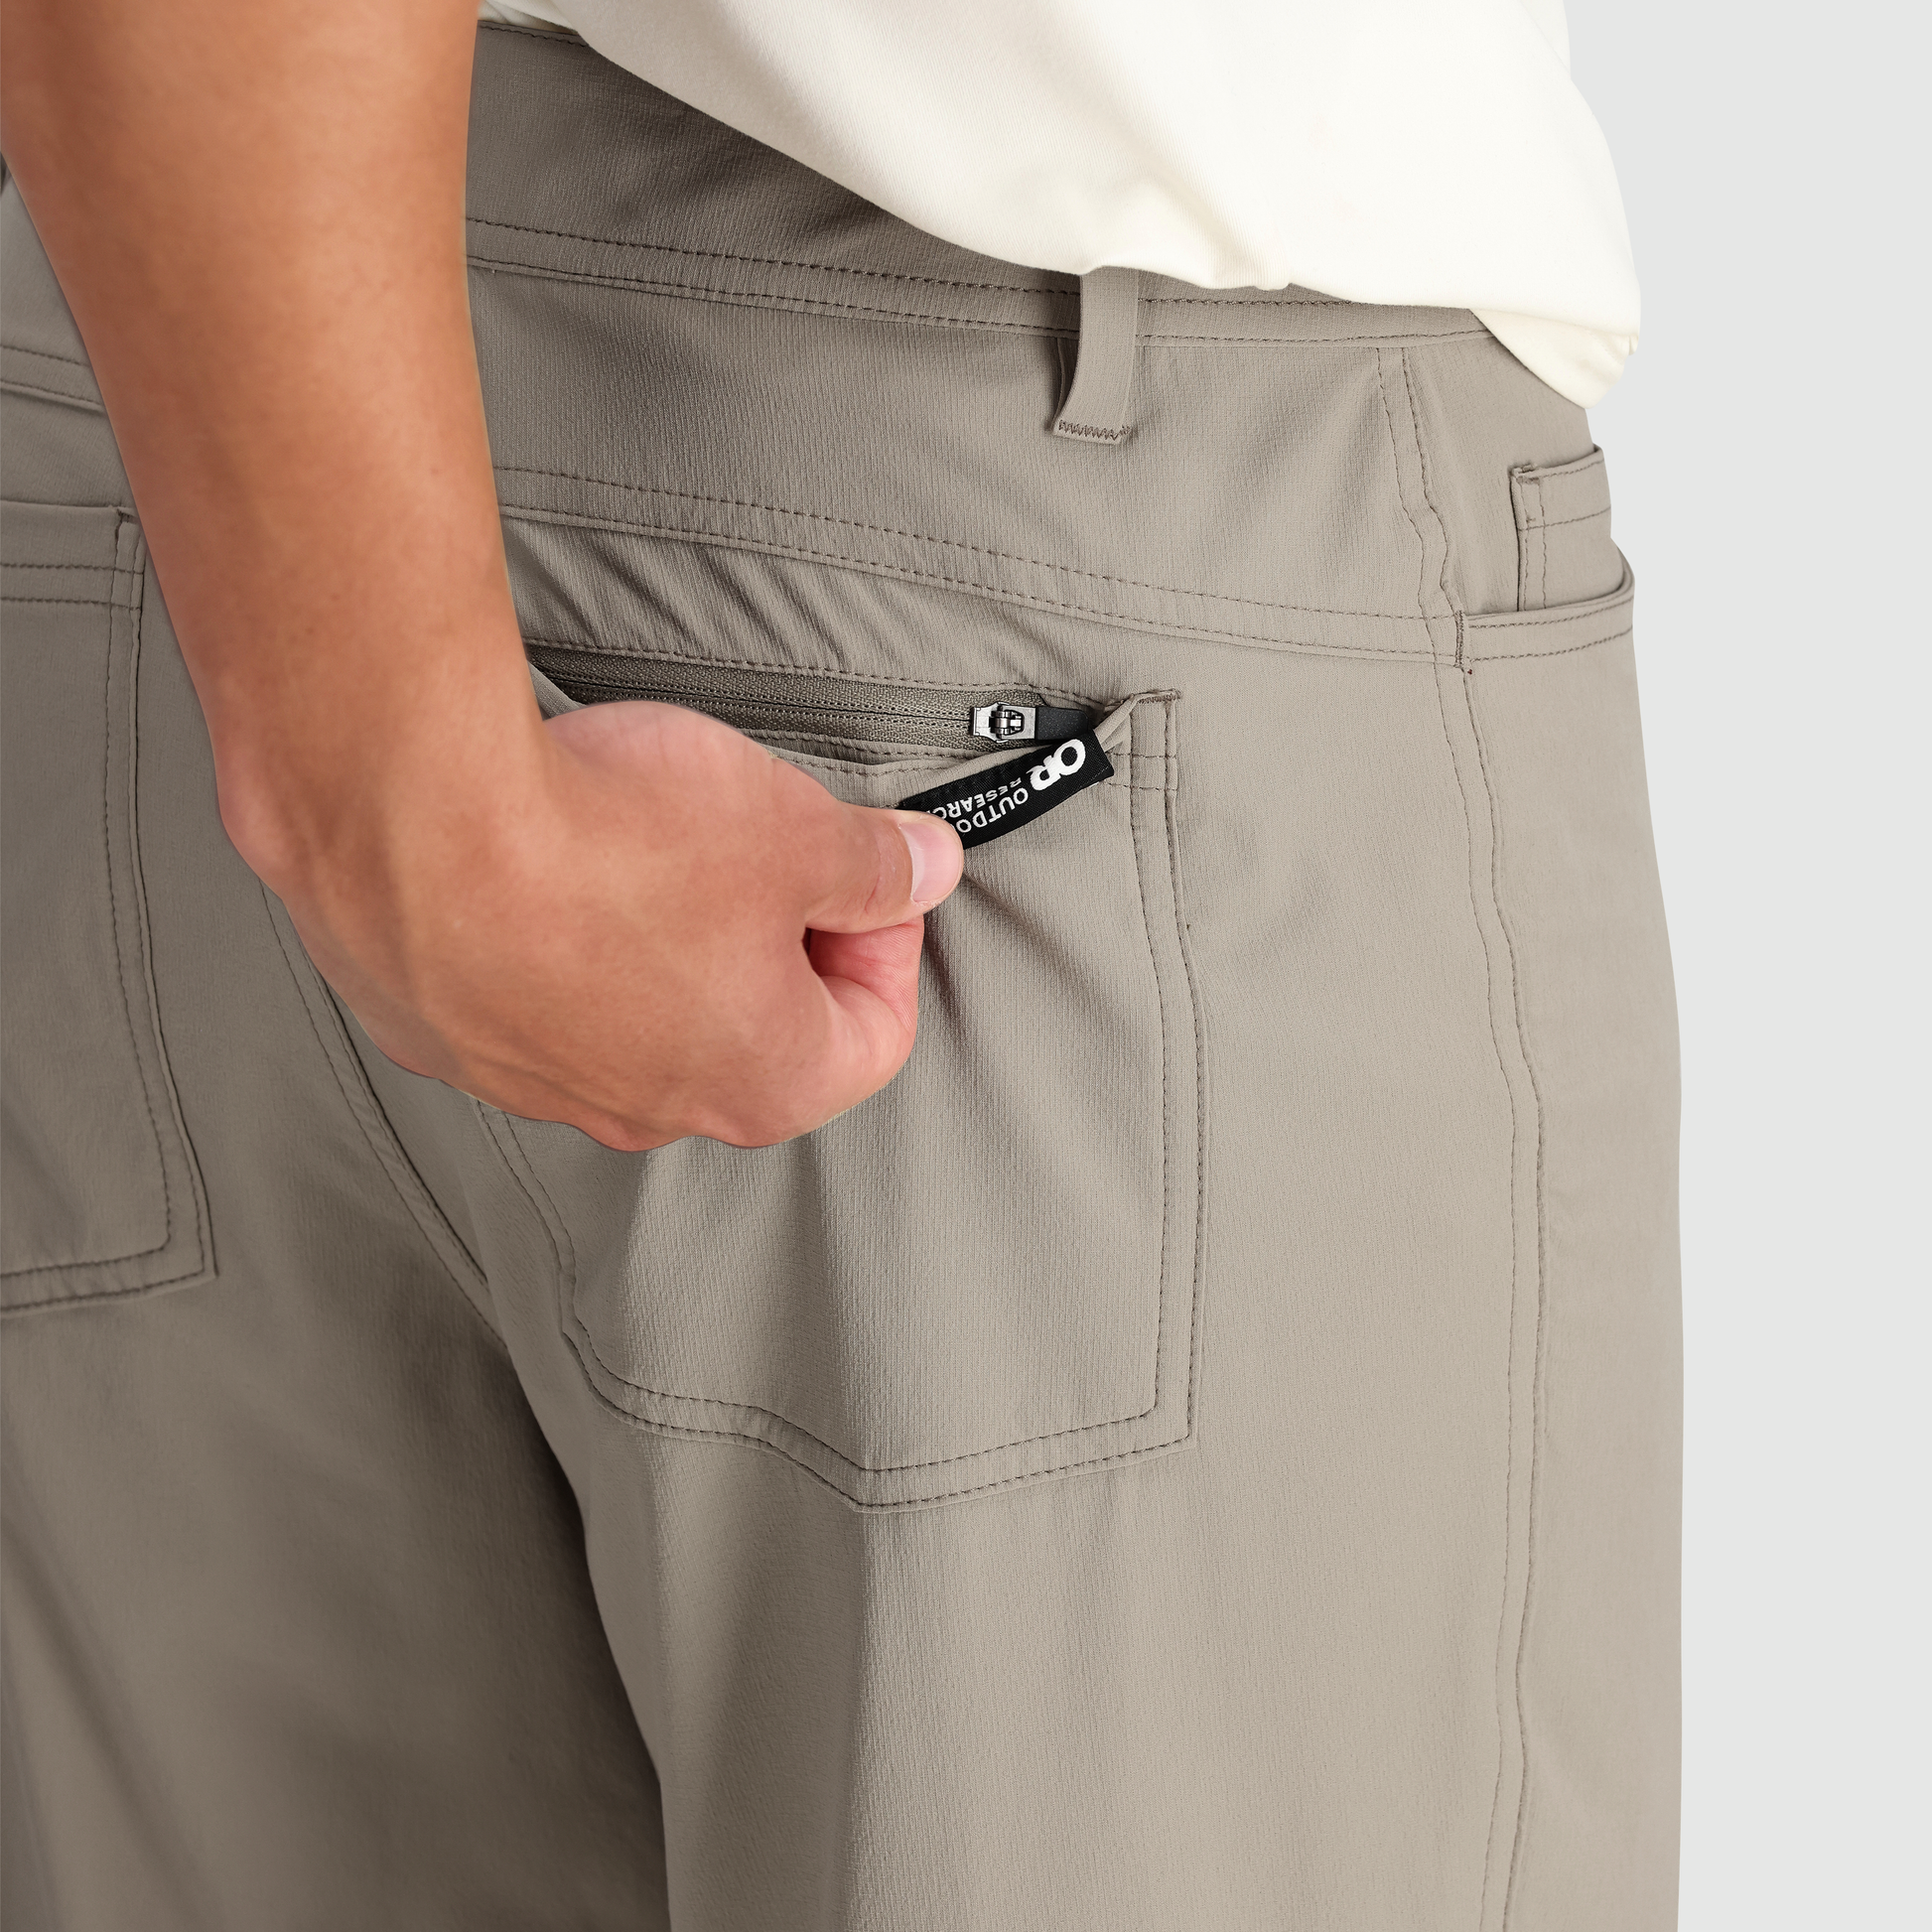 Outdoor Research Ferrosi Transit Pants, 30 Inseam - Mens, FREE SHIPPING  in Canada